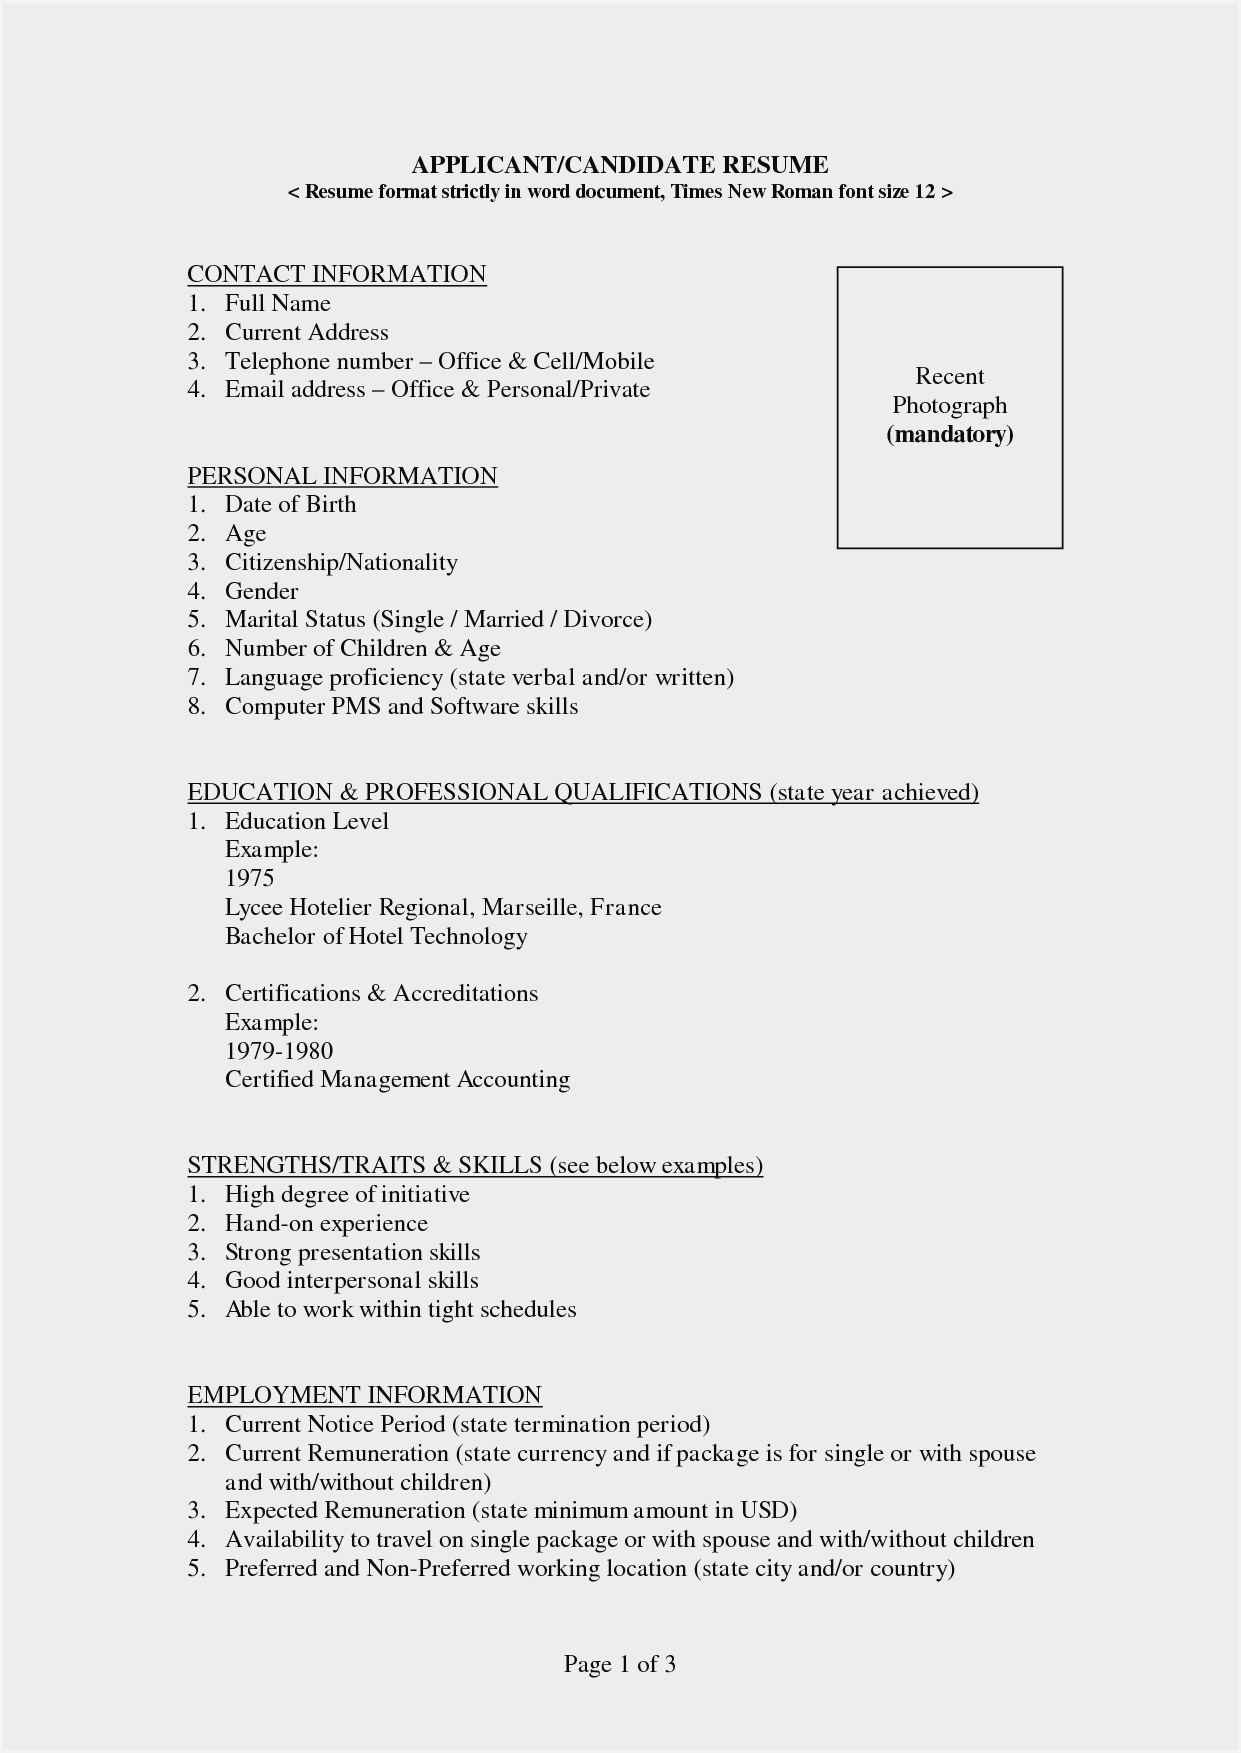 Resume Format Template For Word Download – Resume Sample With Simple Resume Template Microsoft Word